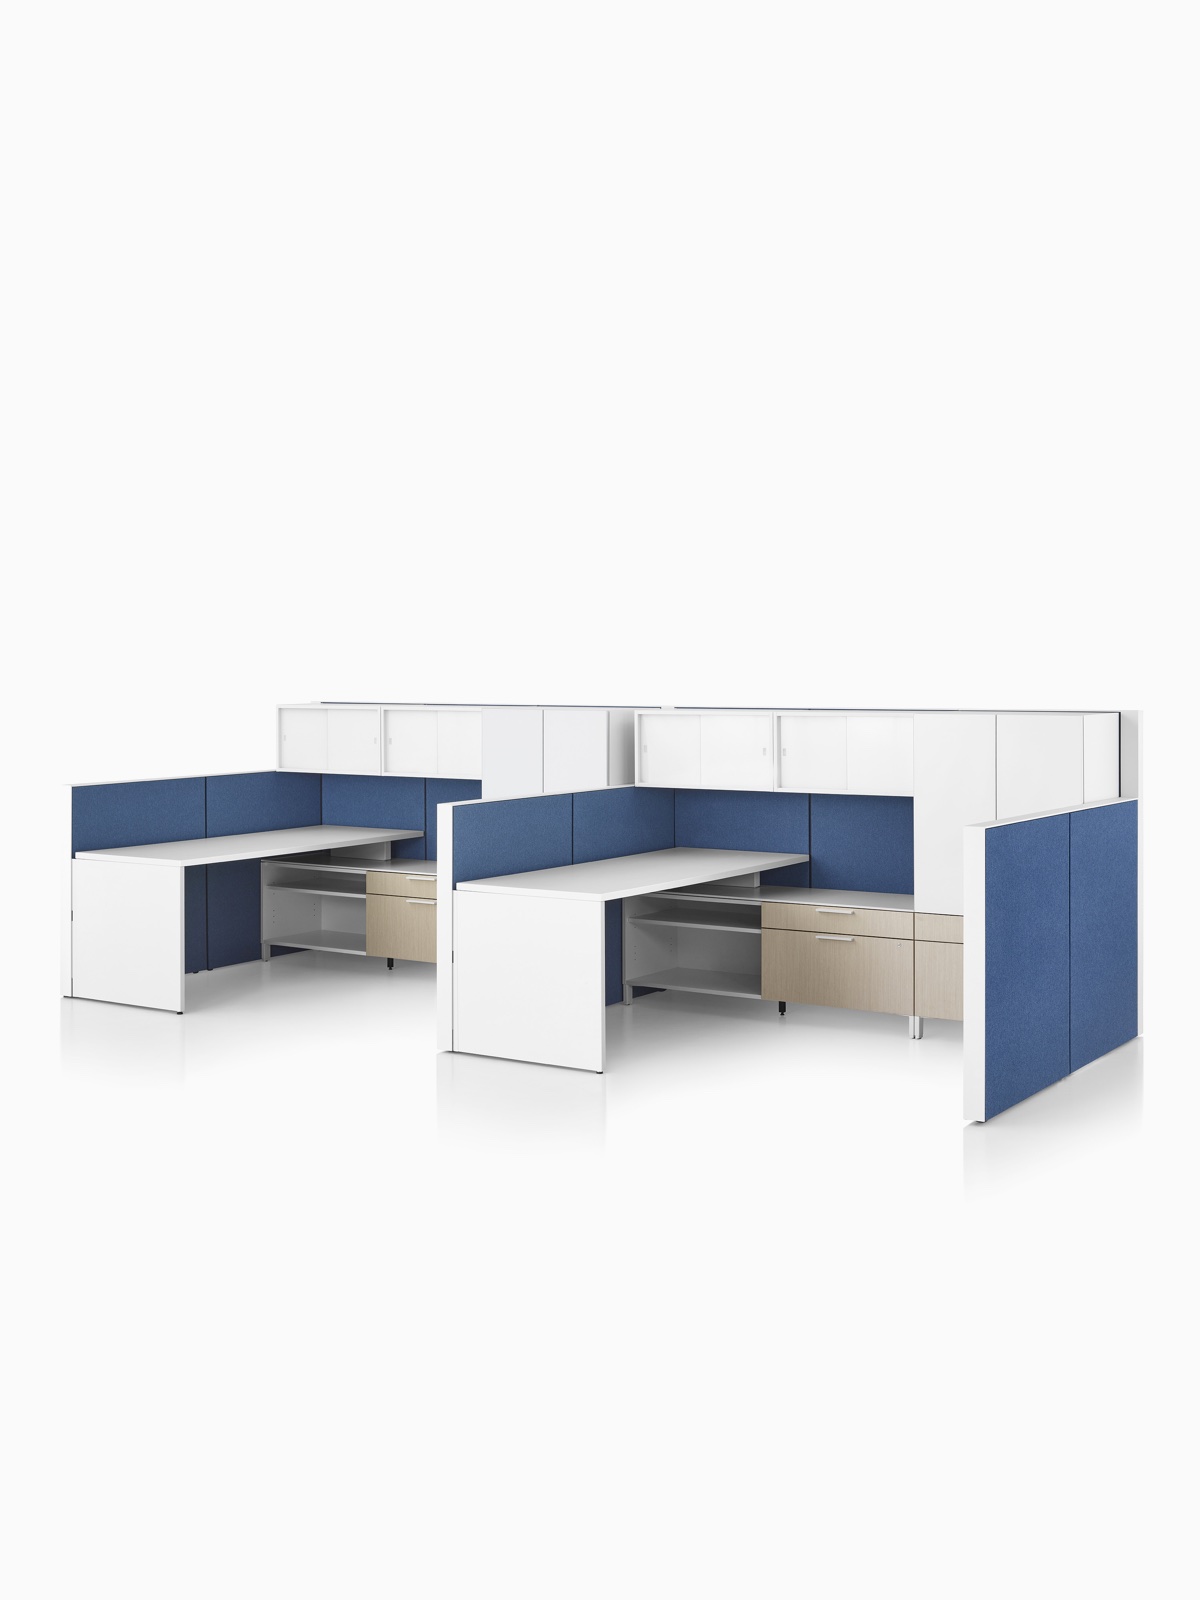 A Canvas Wall workstation with blue panels and white overhead storage.